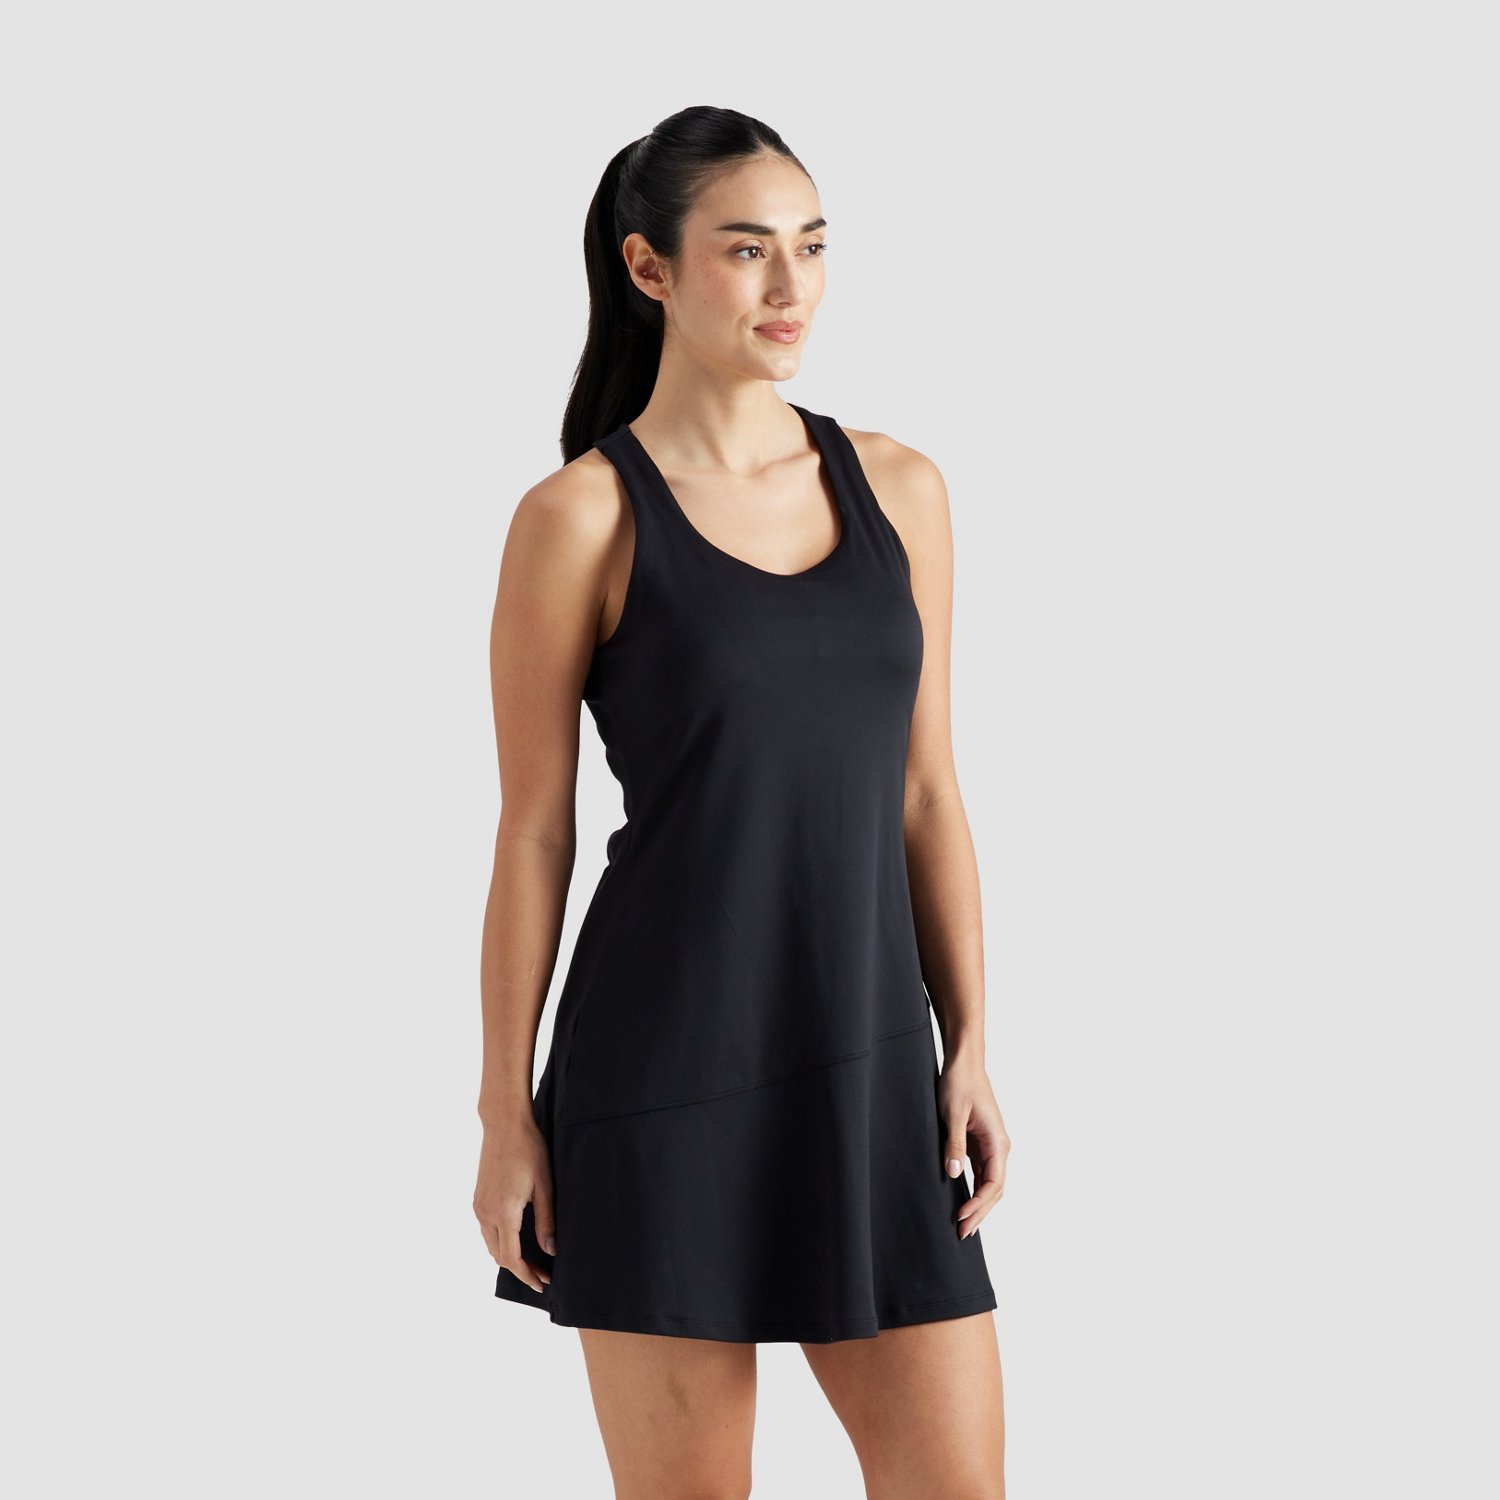 Women's Casual & Athletic Dresses